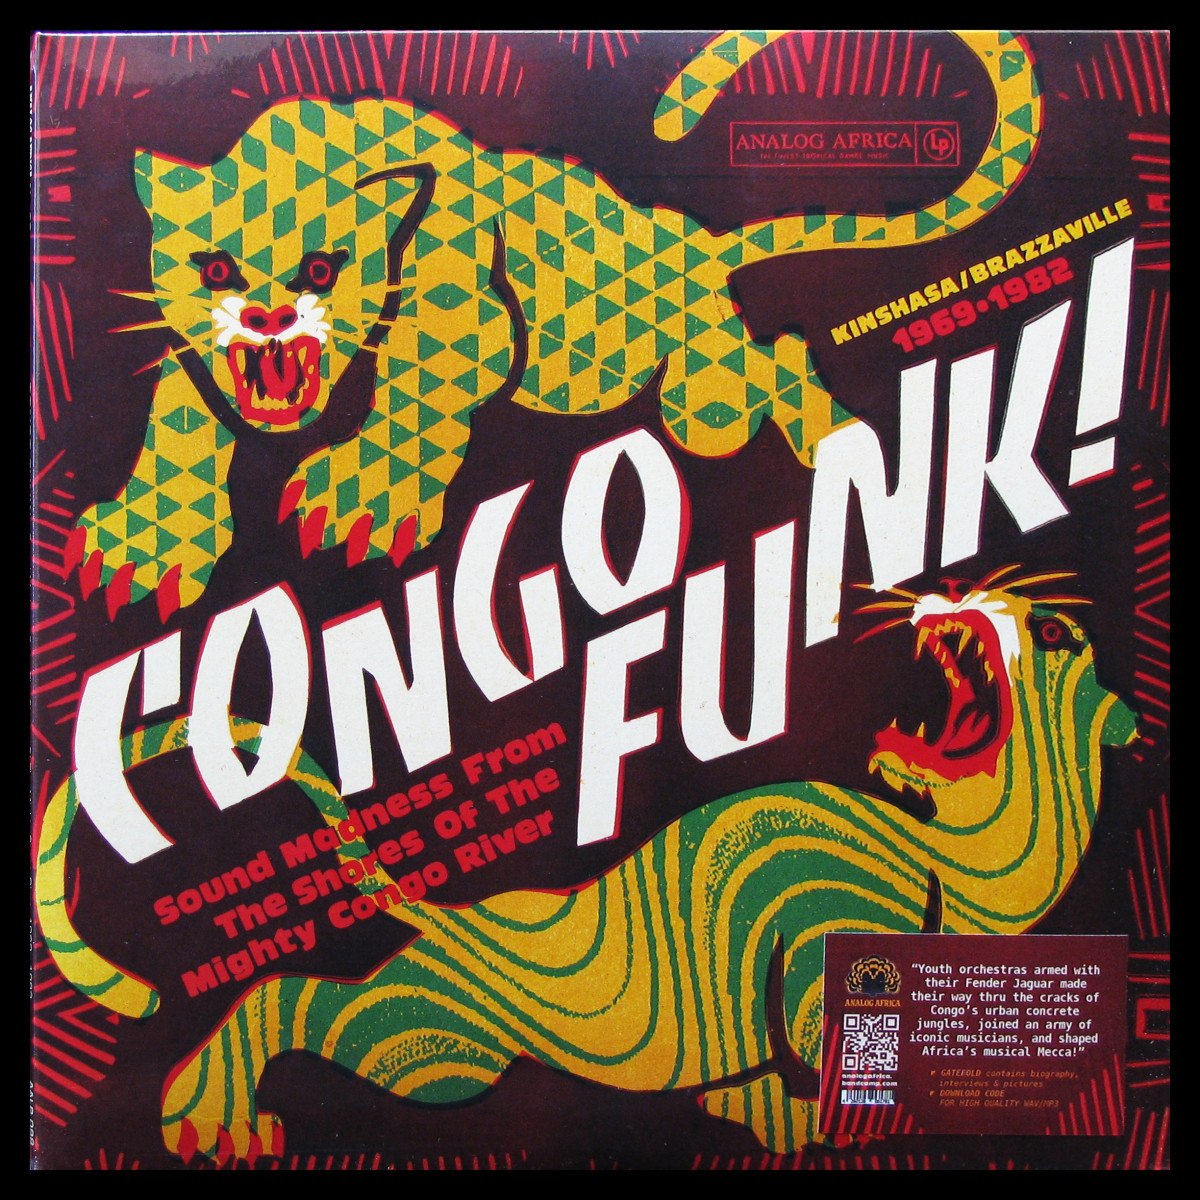 Congo Funk! Sound Madness From The Shores Of The Mighty Congo River